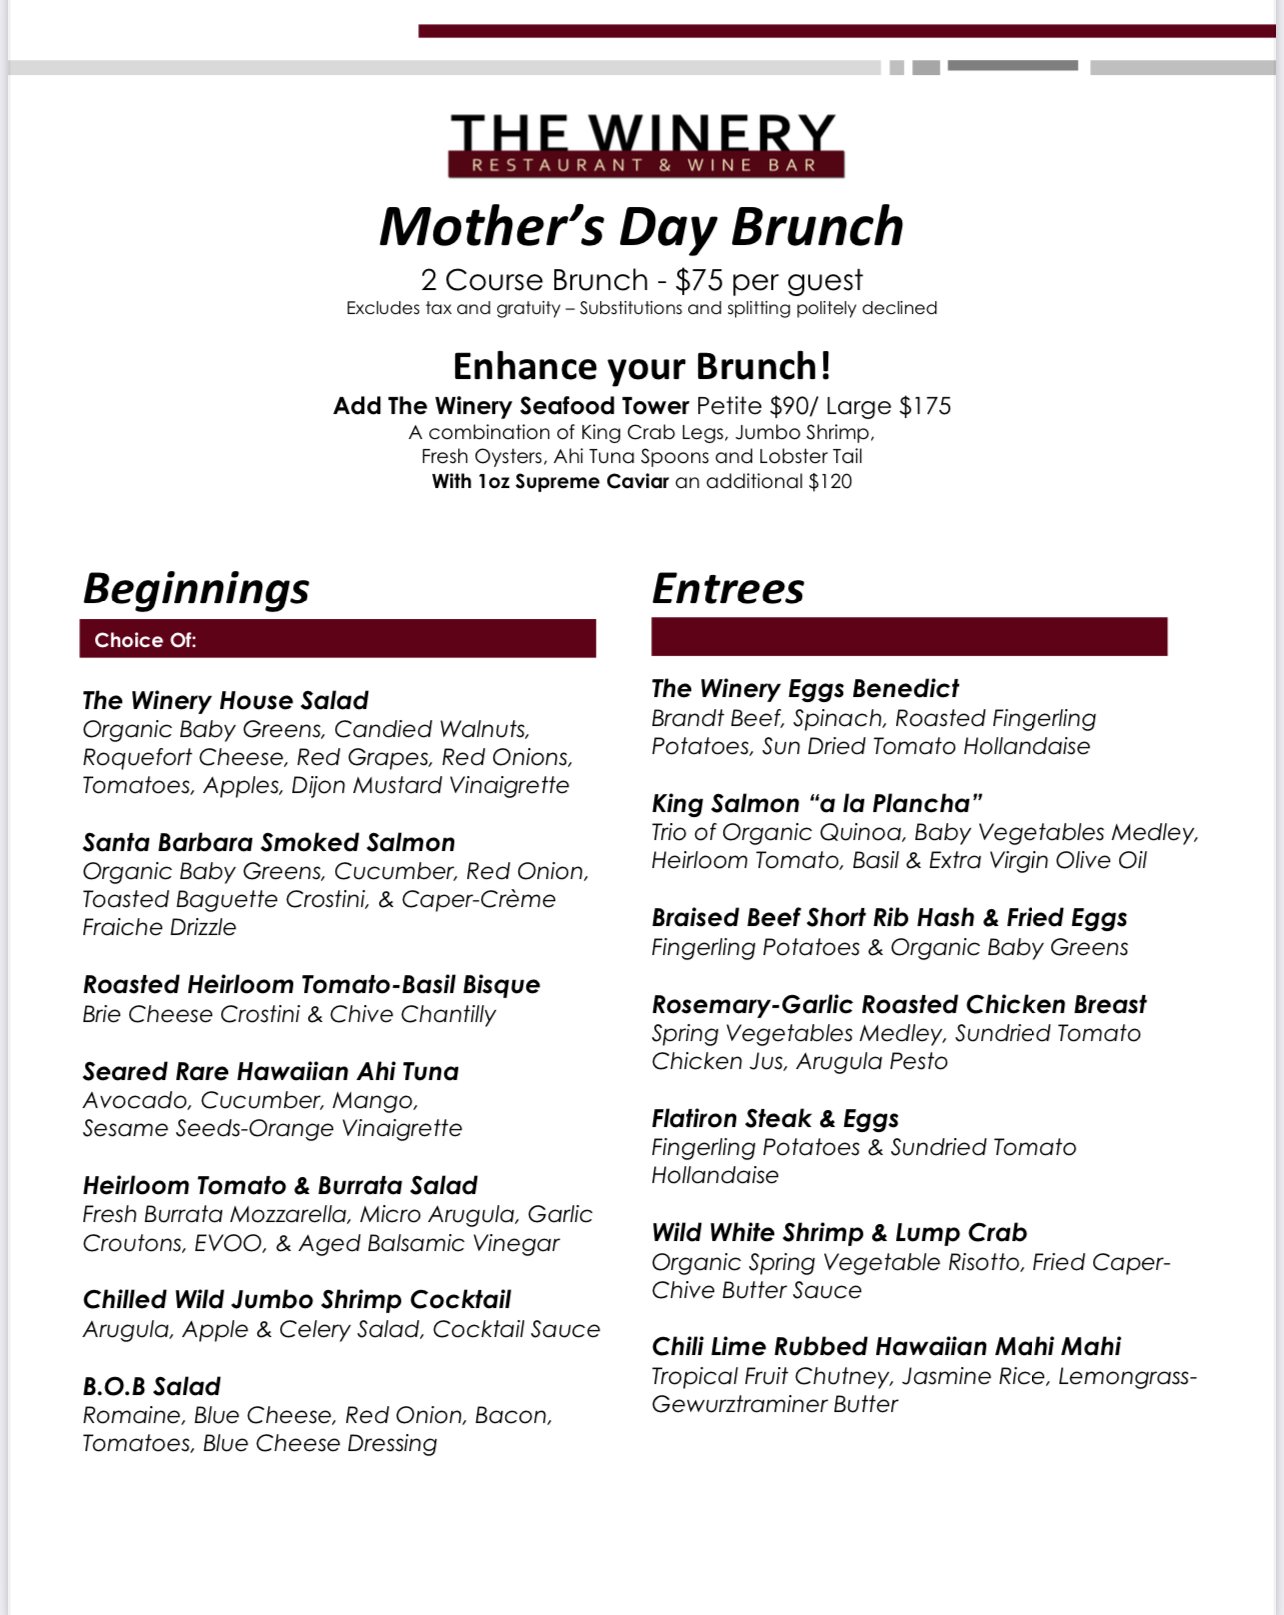 Celebrate Mother's Day at The Winery Newport Beach! The Winery